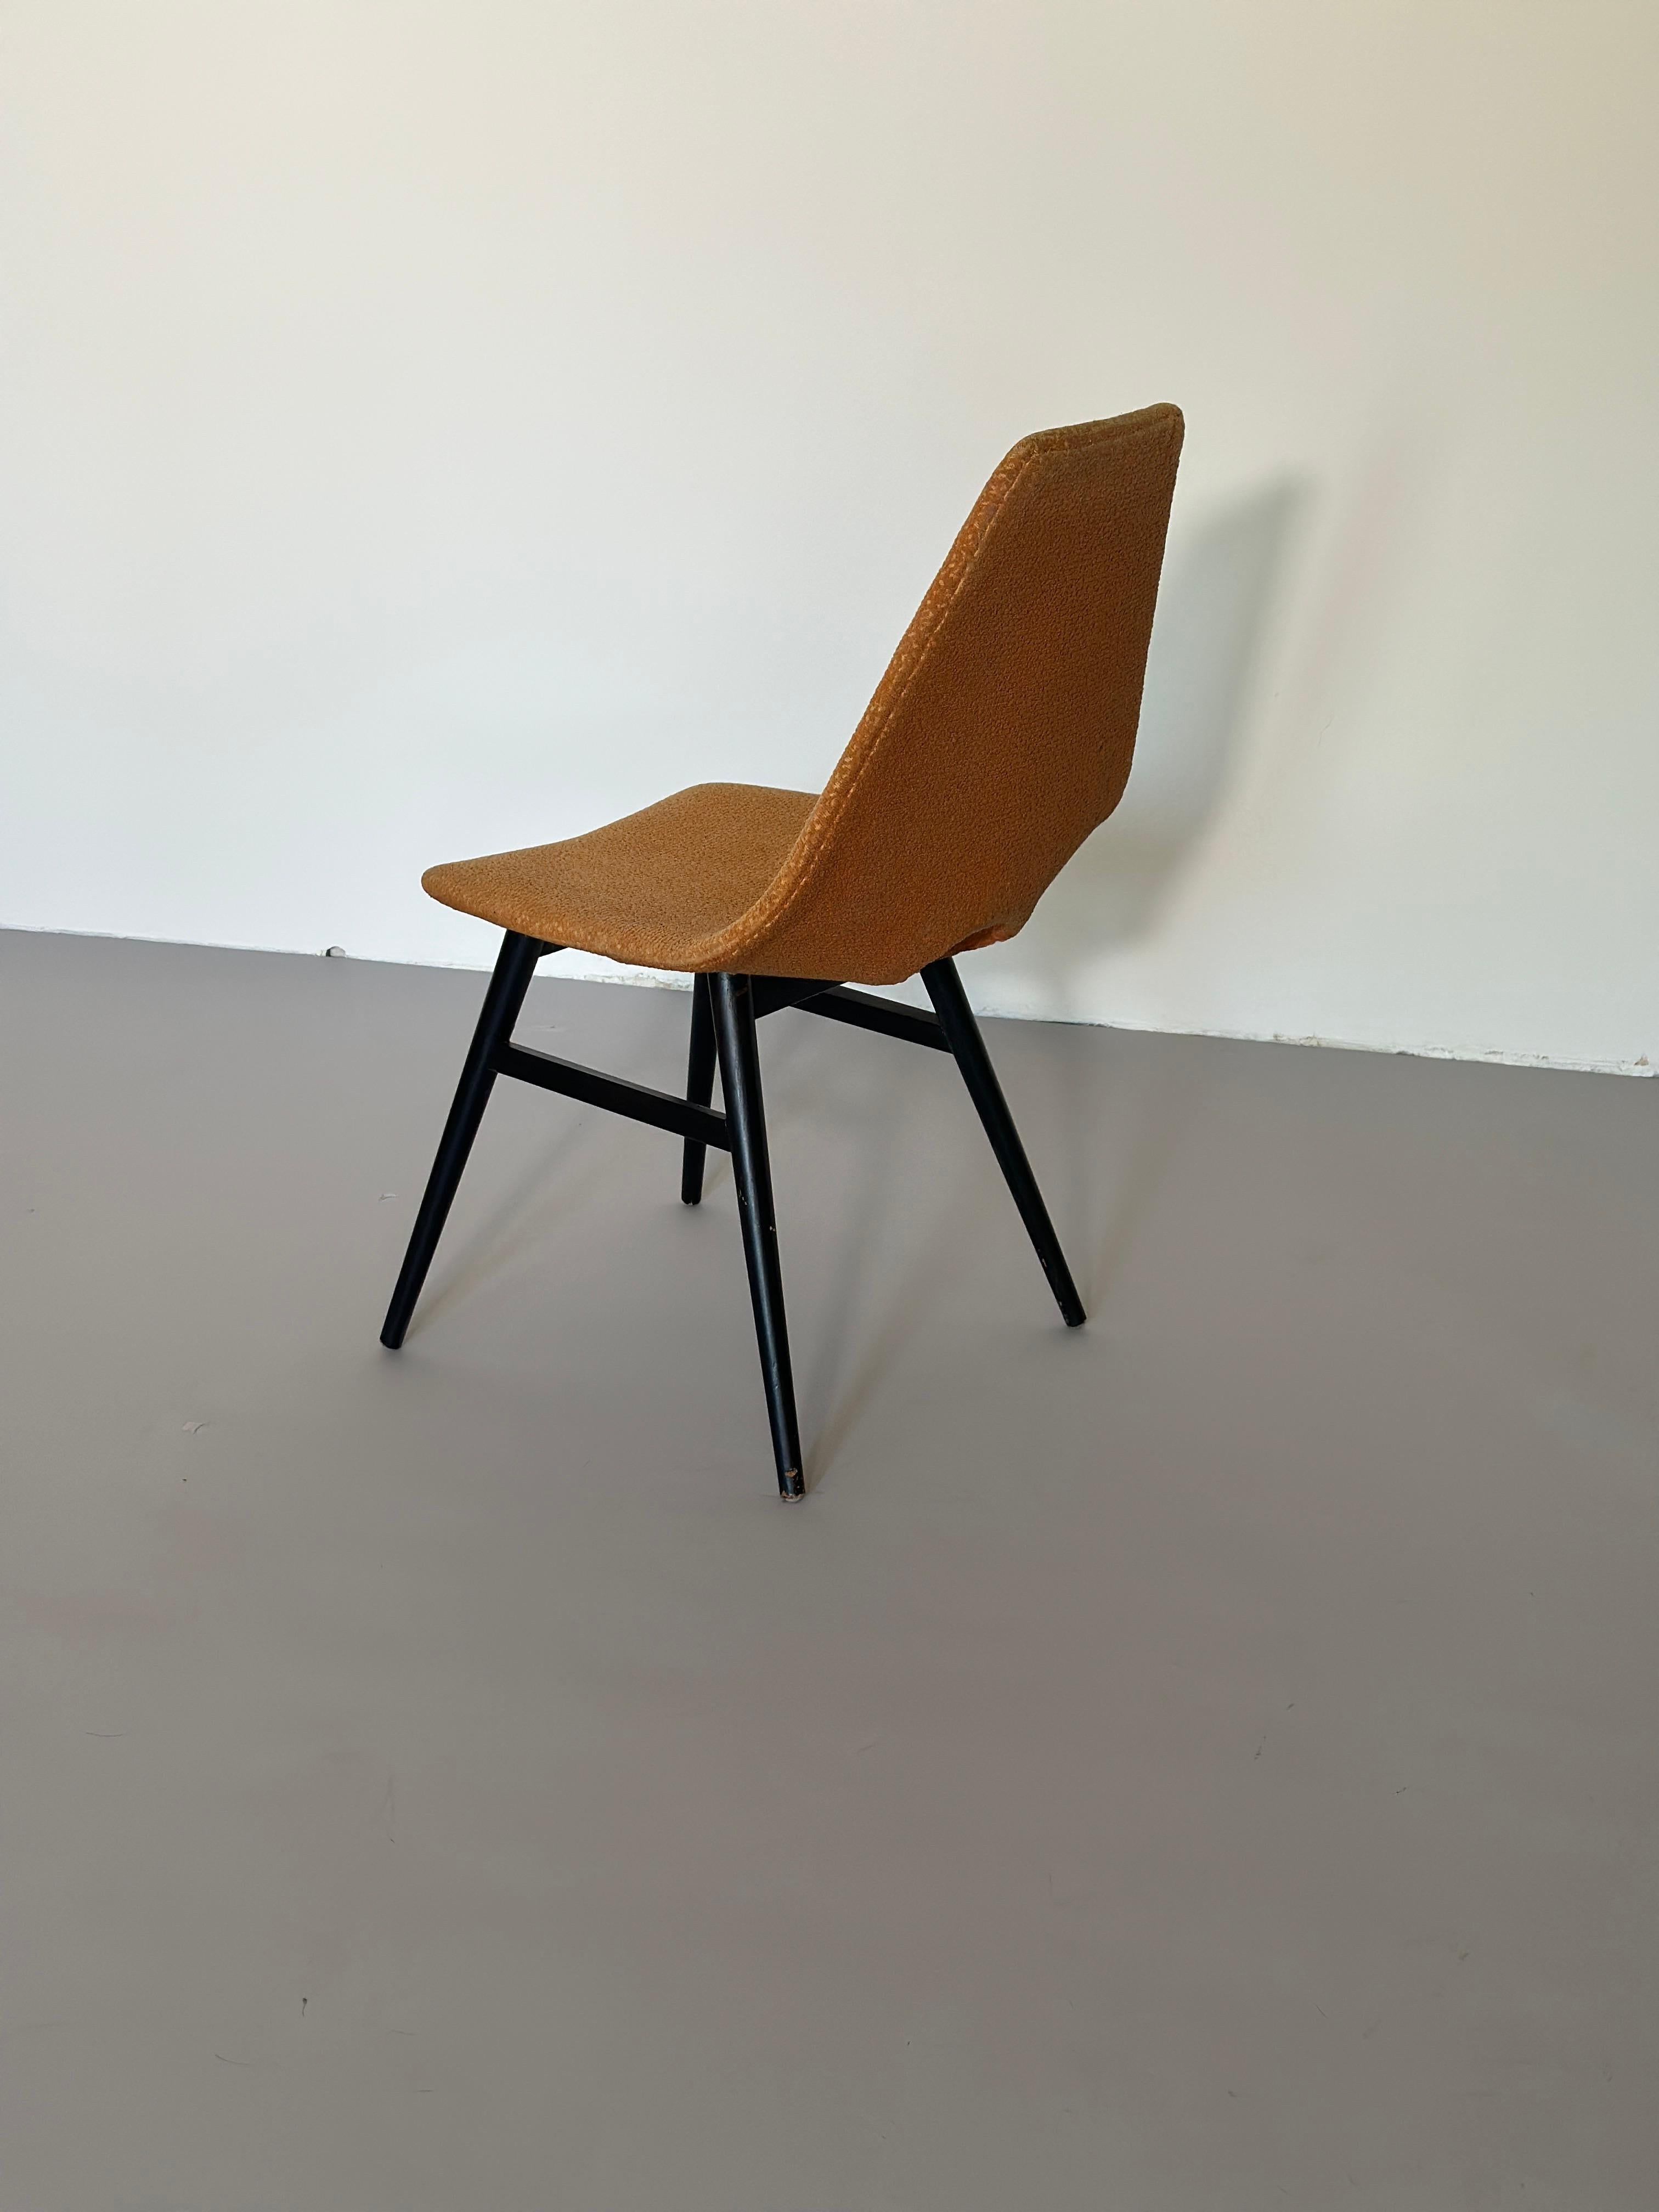 Fabric Chair By Judit Burian and Erika Szek 1950s For Sale